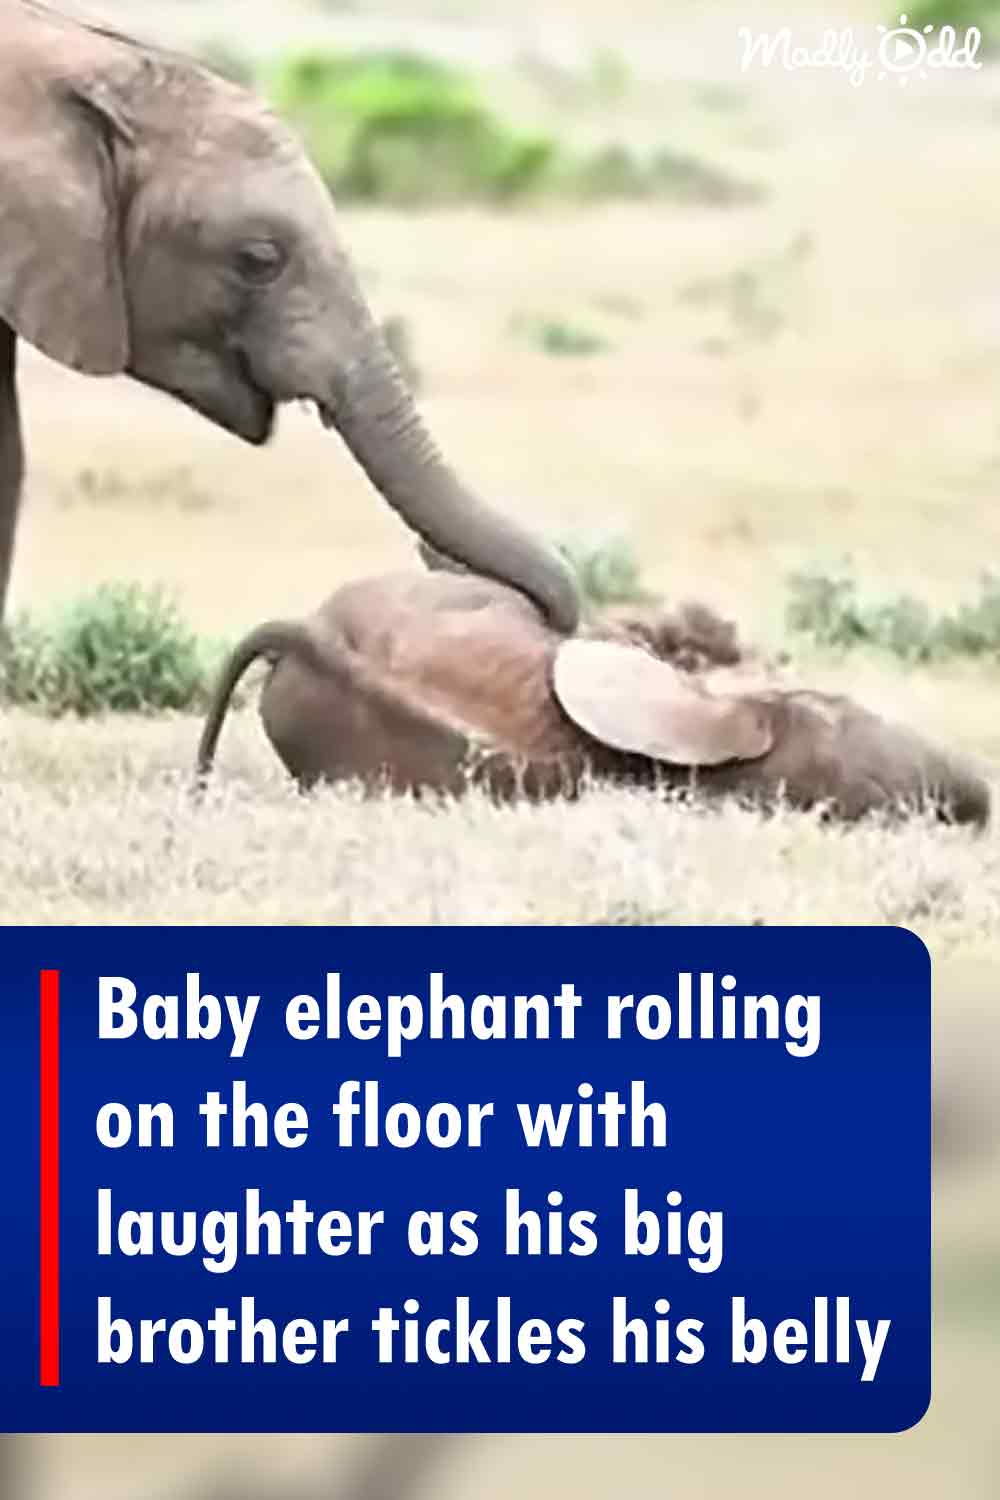 Baby elephant rolling on the floor with laughter as his big brother tickles his belly